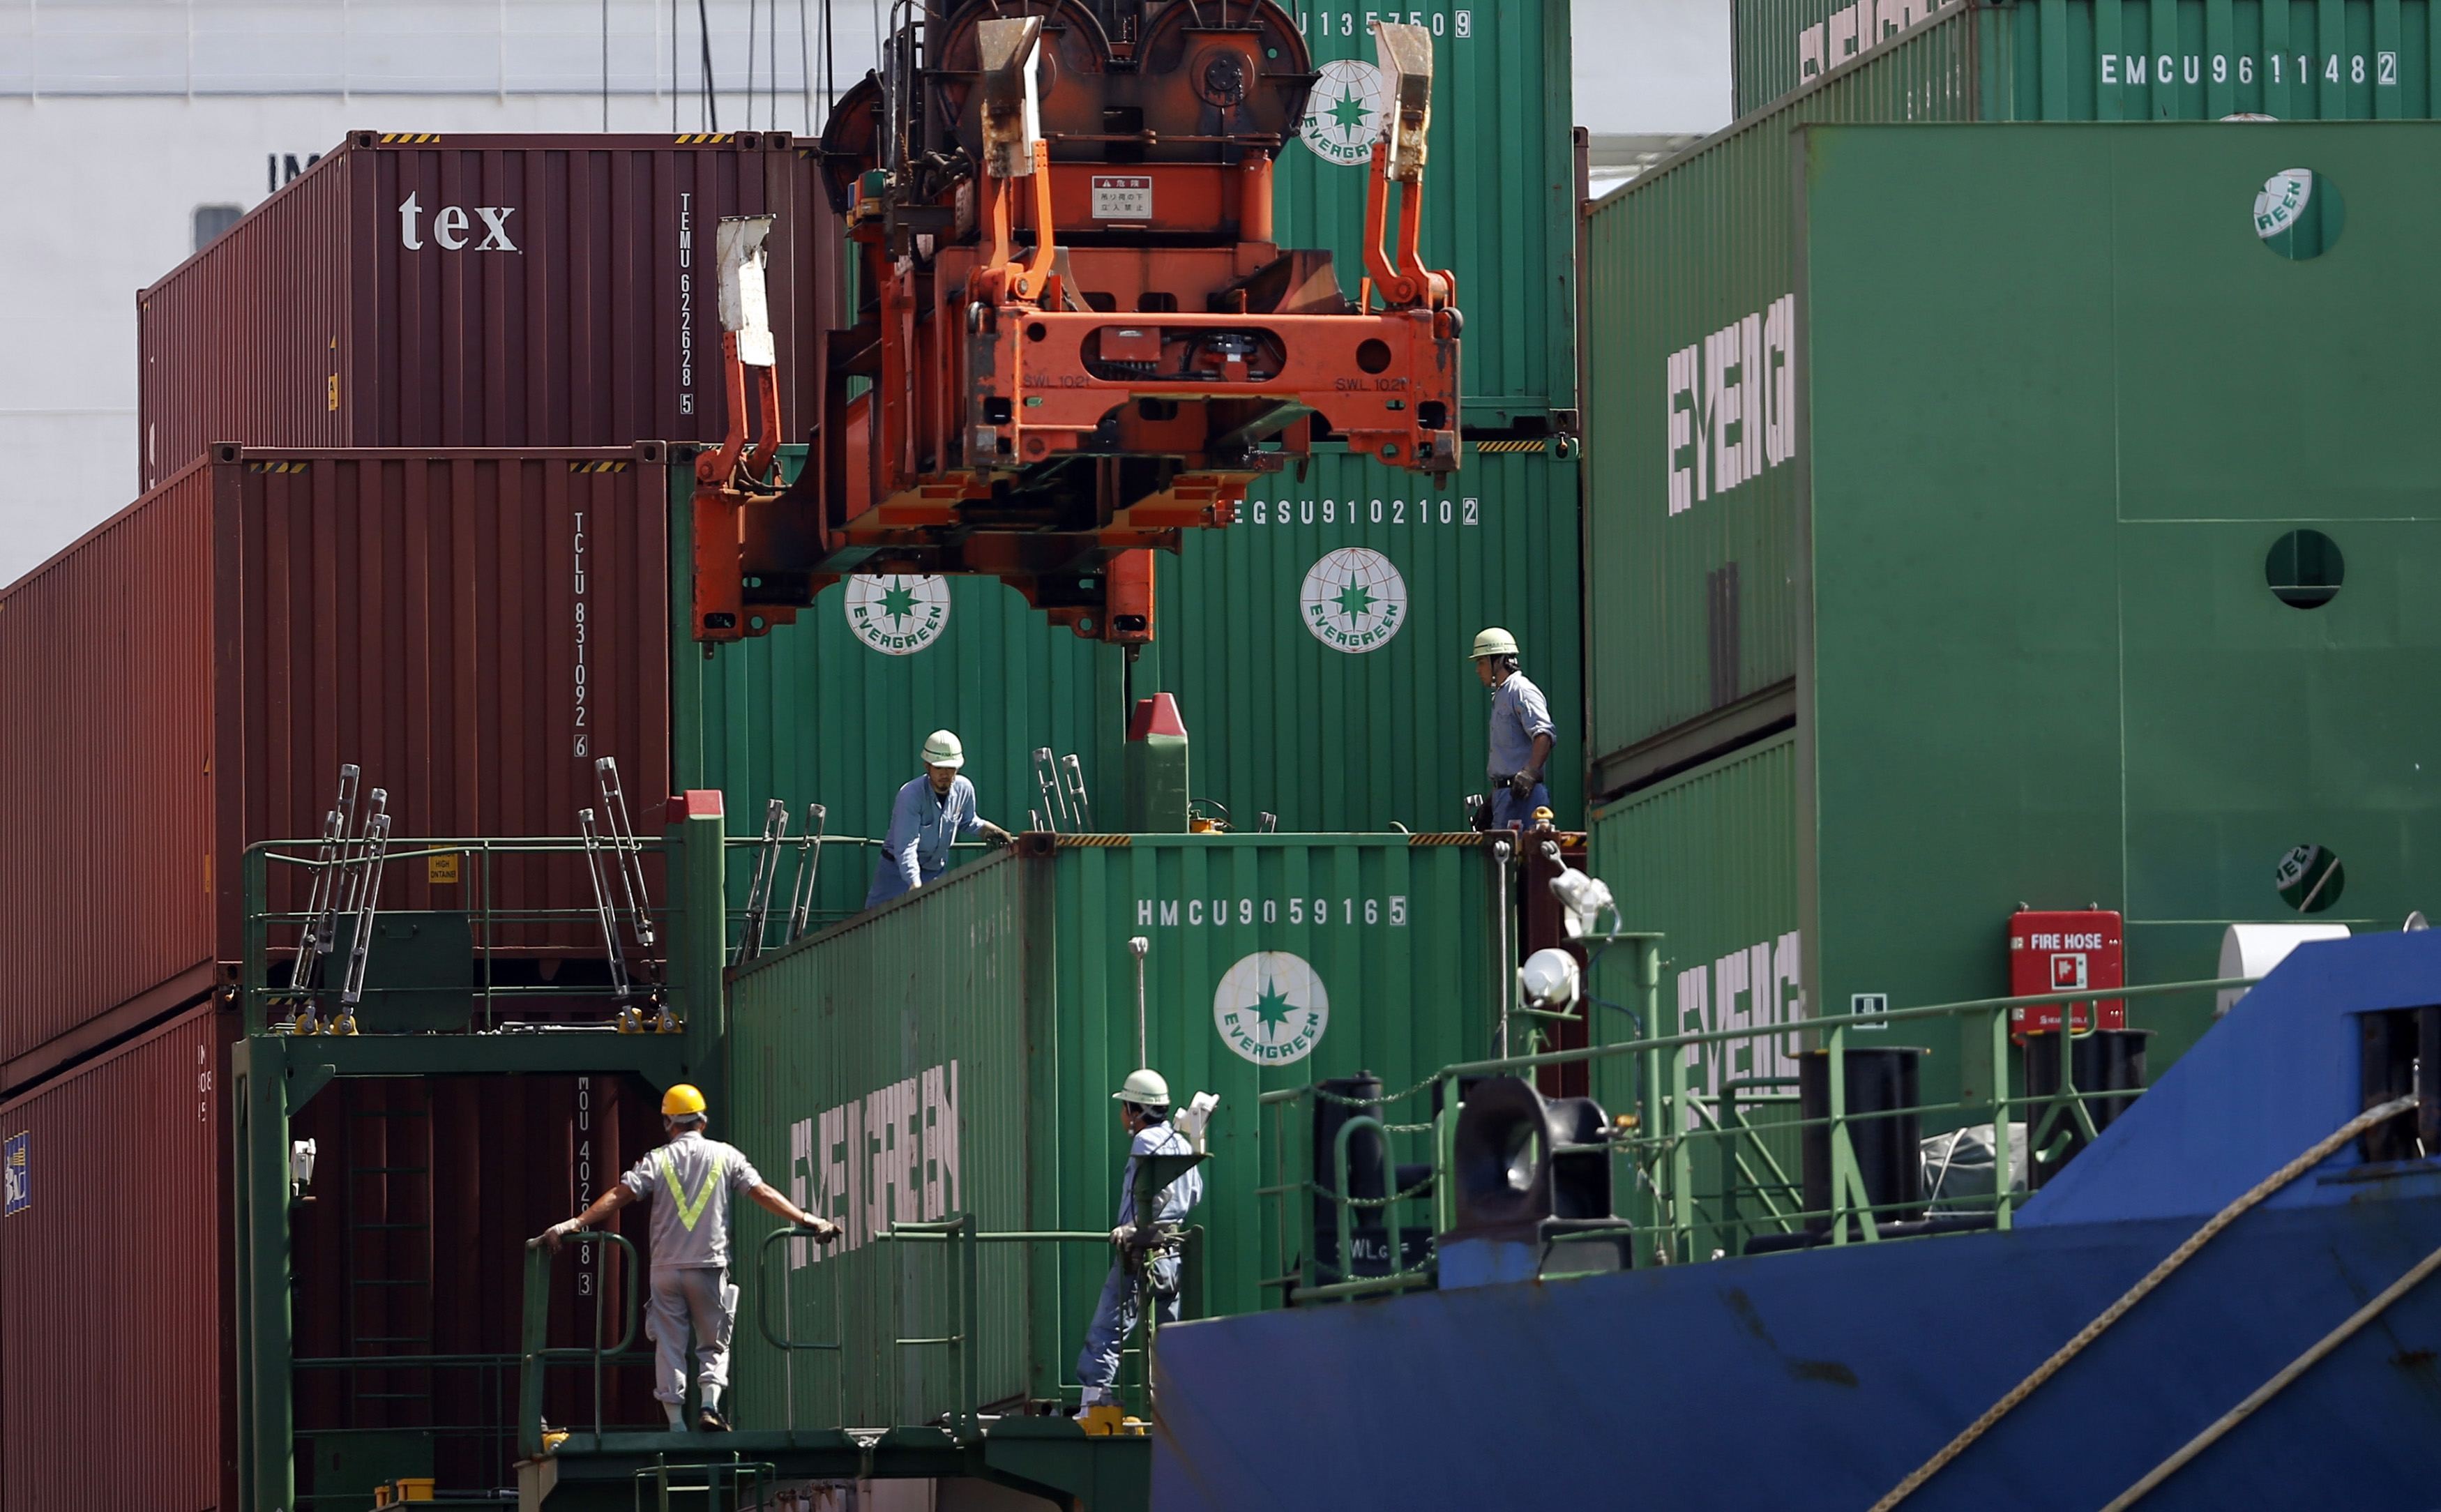 Crew watch as a container is loaded on to a cargo ship in Tokyo. The International Chamber of Shipping estimates that at least 100,000 seafarers a month need to change over from the ships they work on. Photo: Reuters